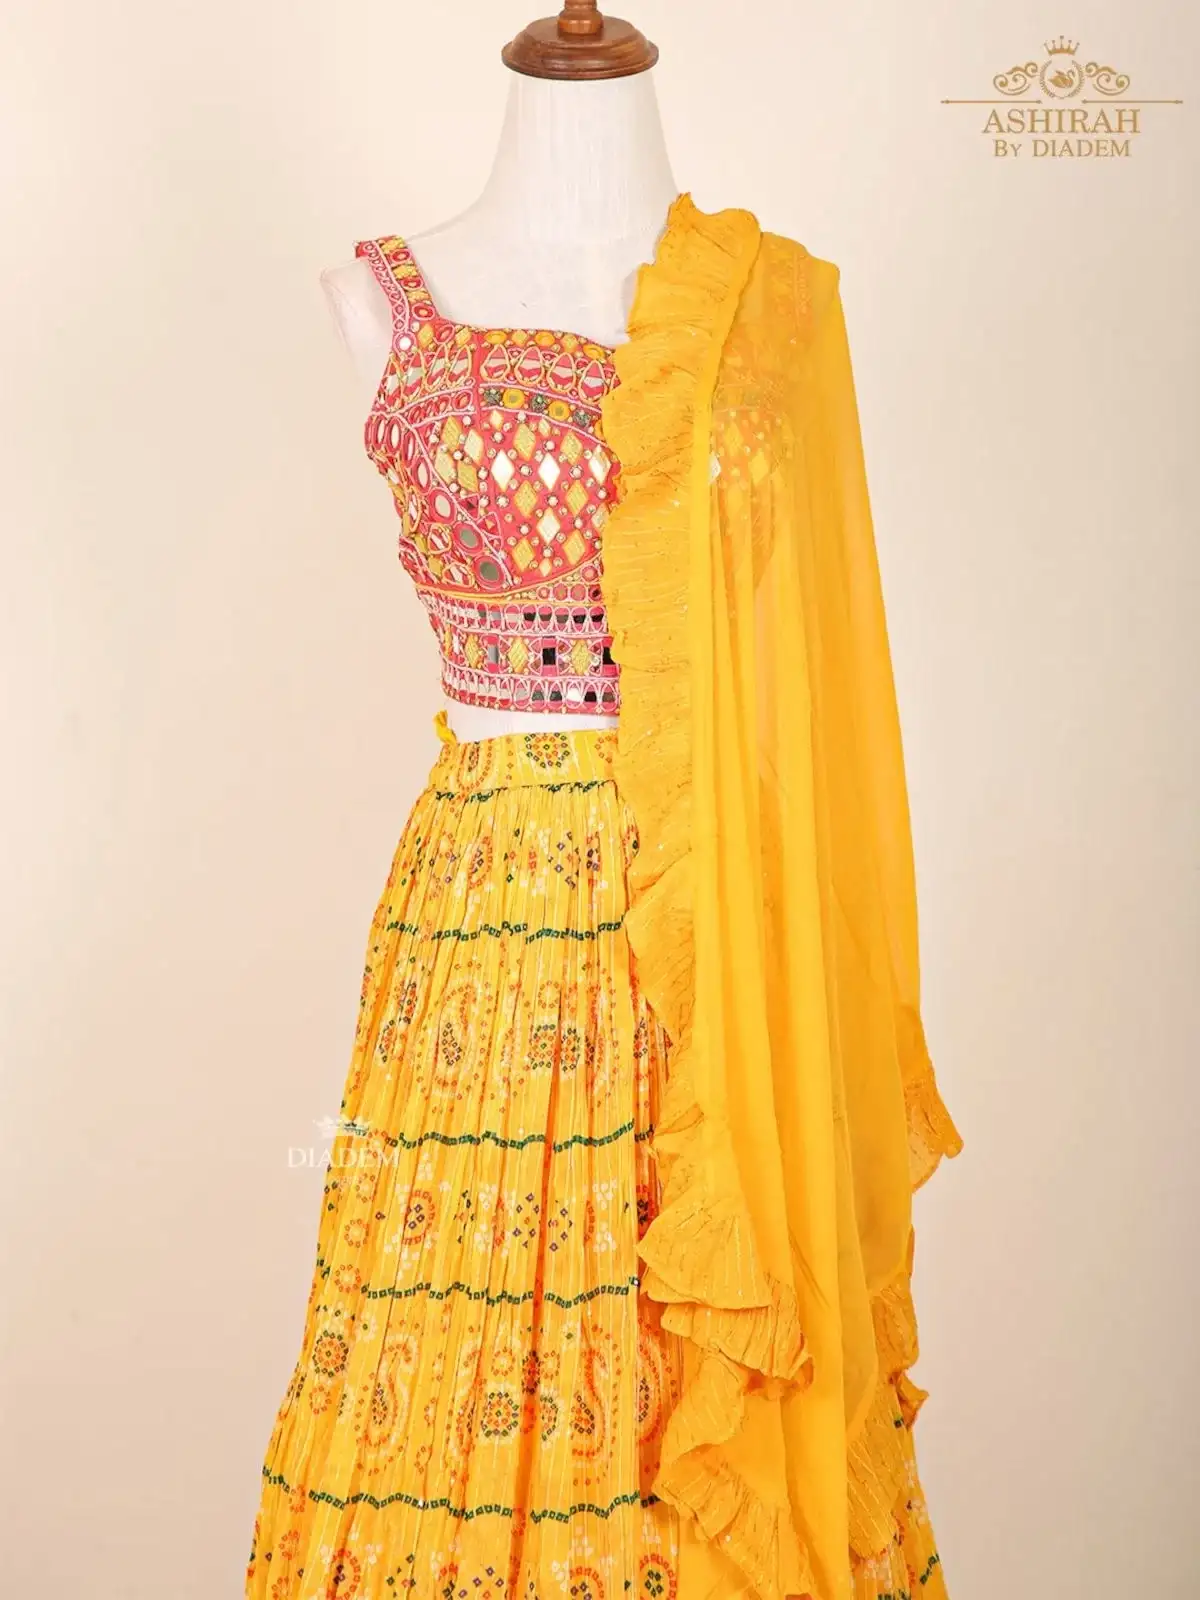 Sun Yellow Lehenga Adorned In Paisley Prints And Embroideries With Dupatta